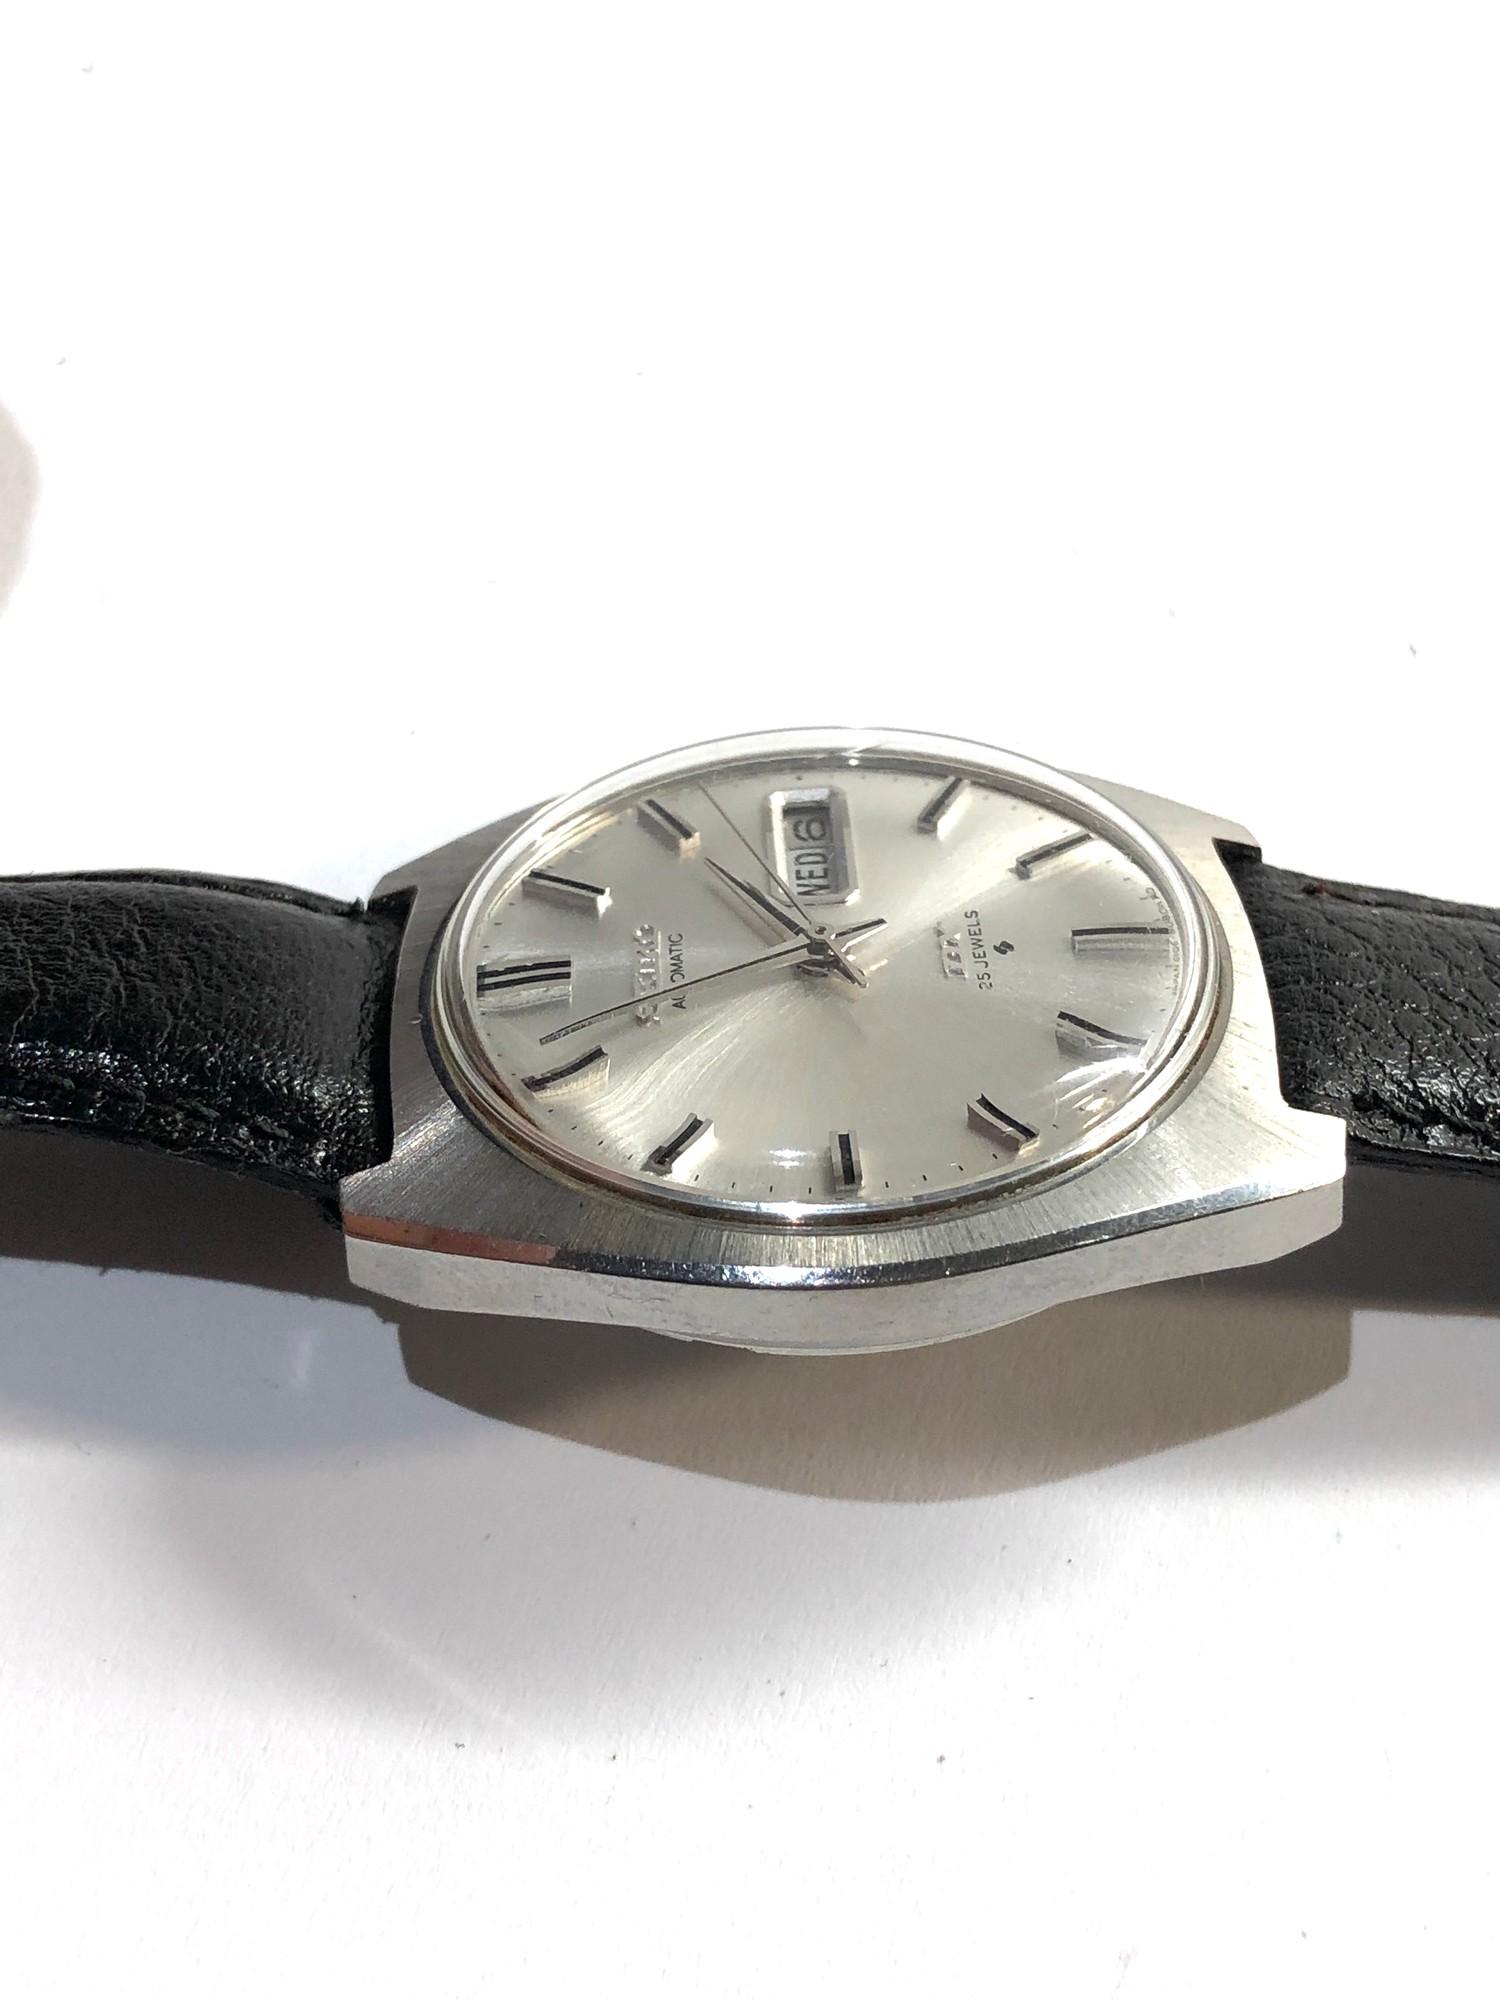 Vintage Seiko DX automatic 6106-8080 day date 25 jewel gents wristwatch in good overall condition in - Image 3 of 4